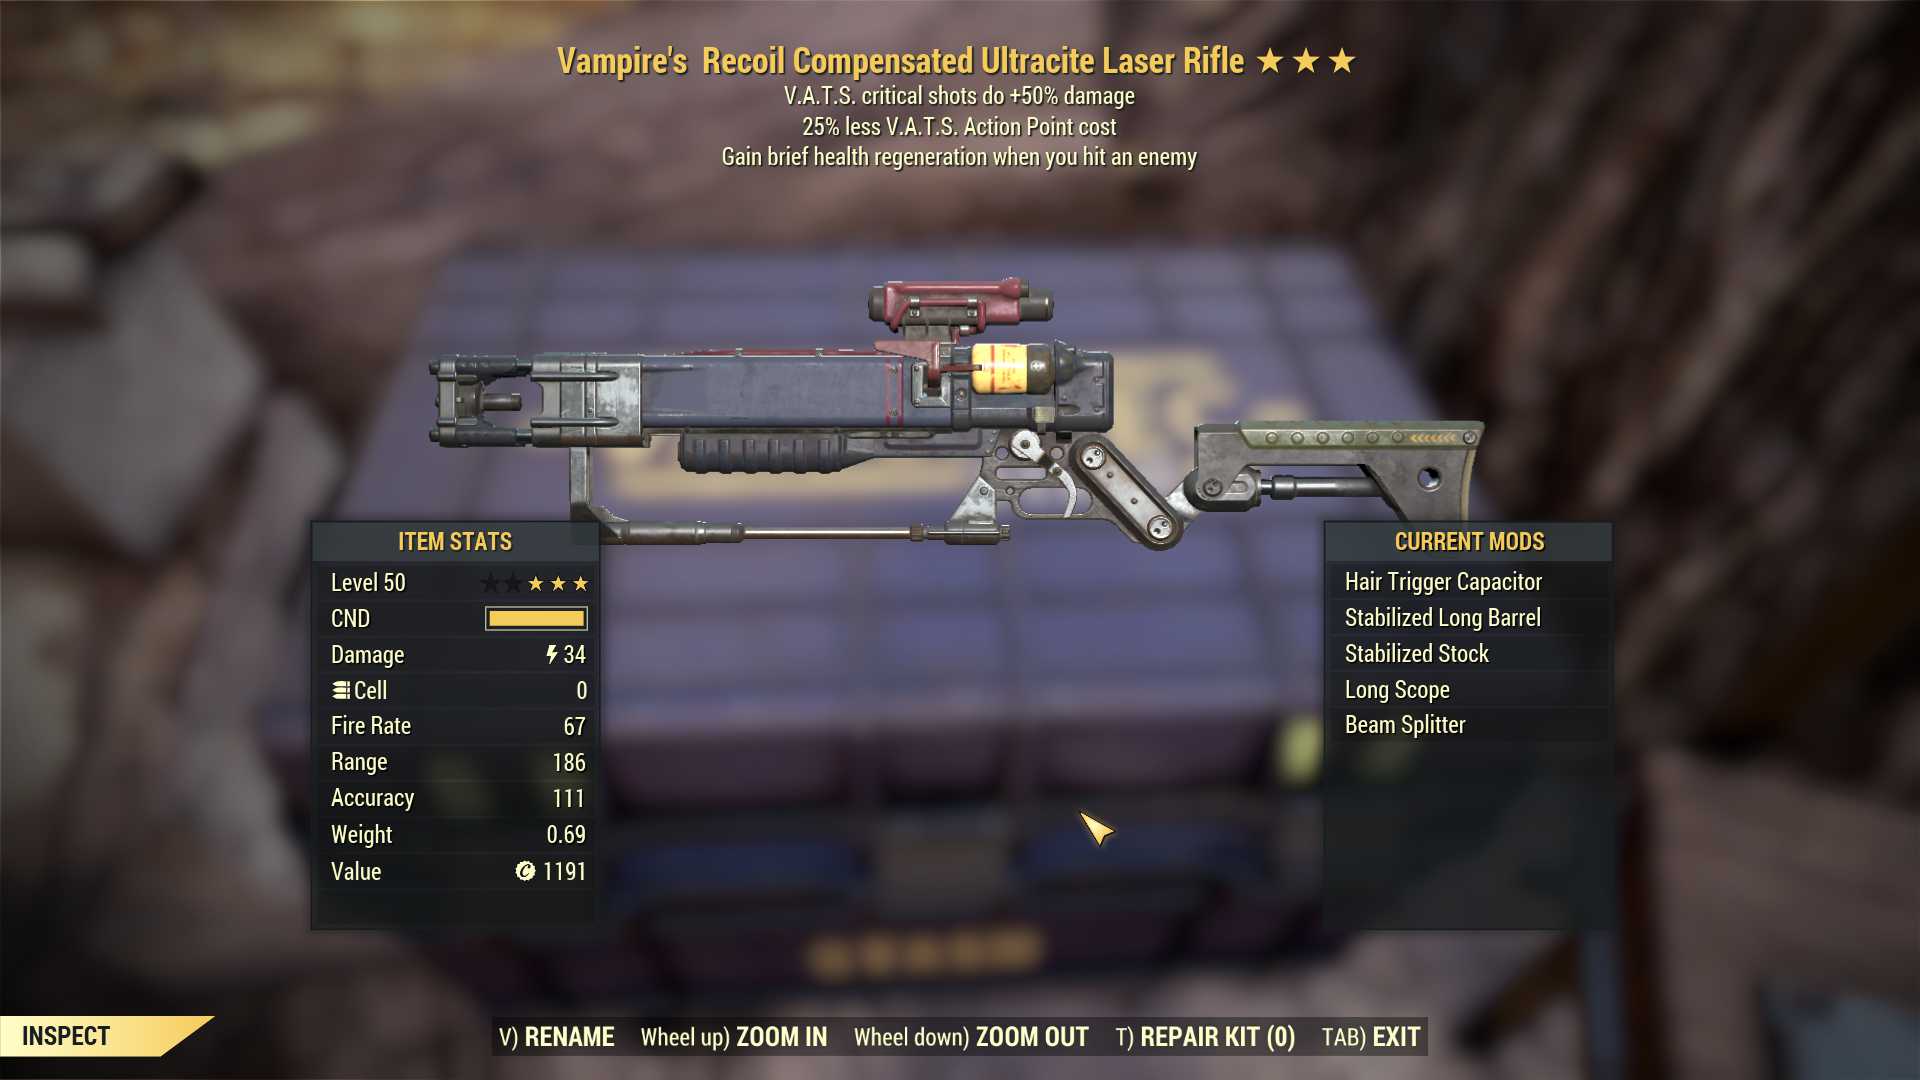 Vampire's Ultracite Laser rifle (+50% critical damage, 25% less VATS AP cost)